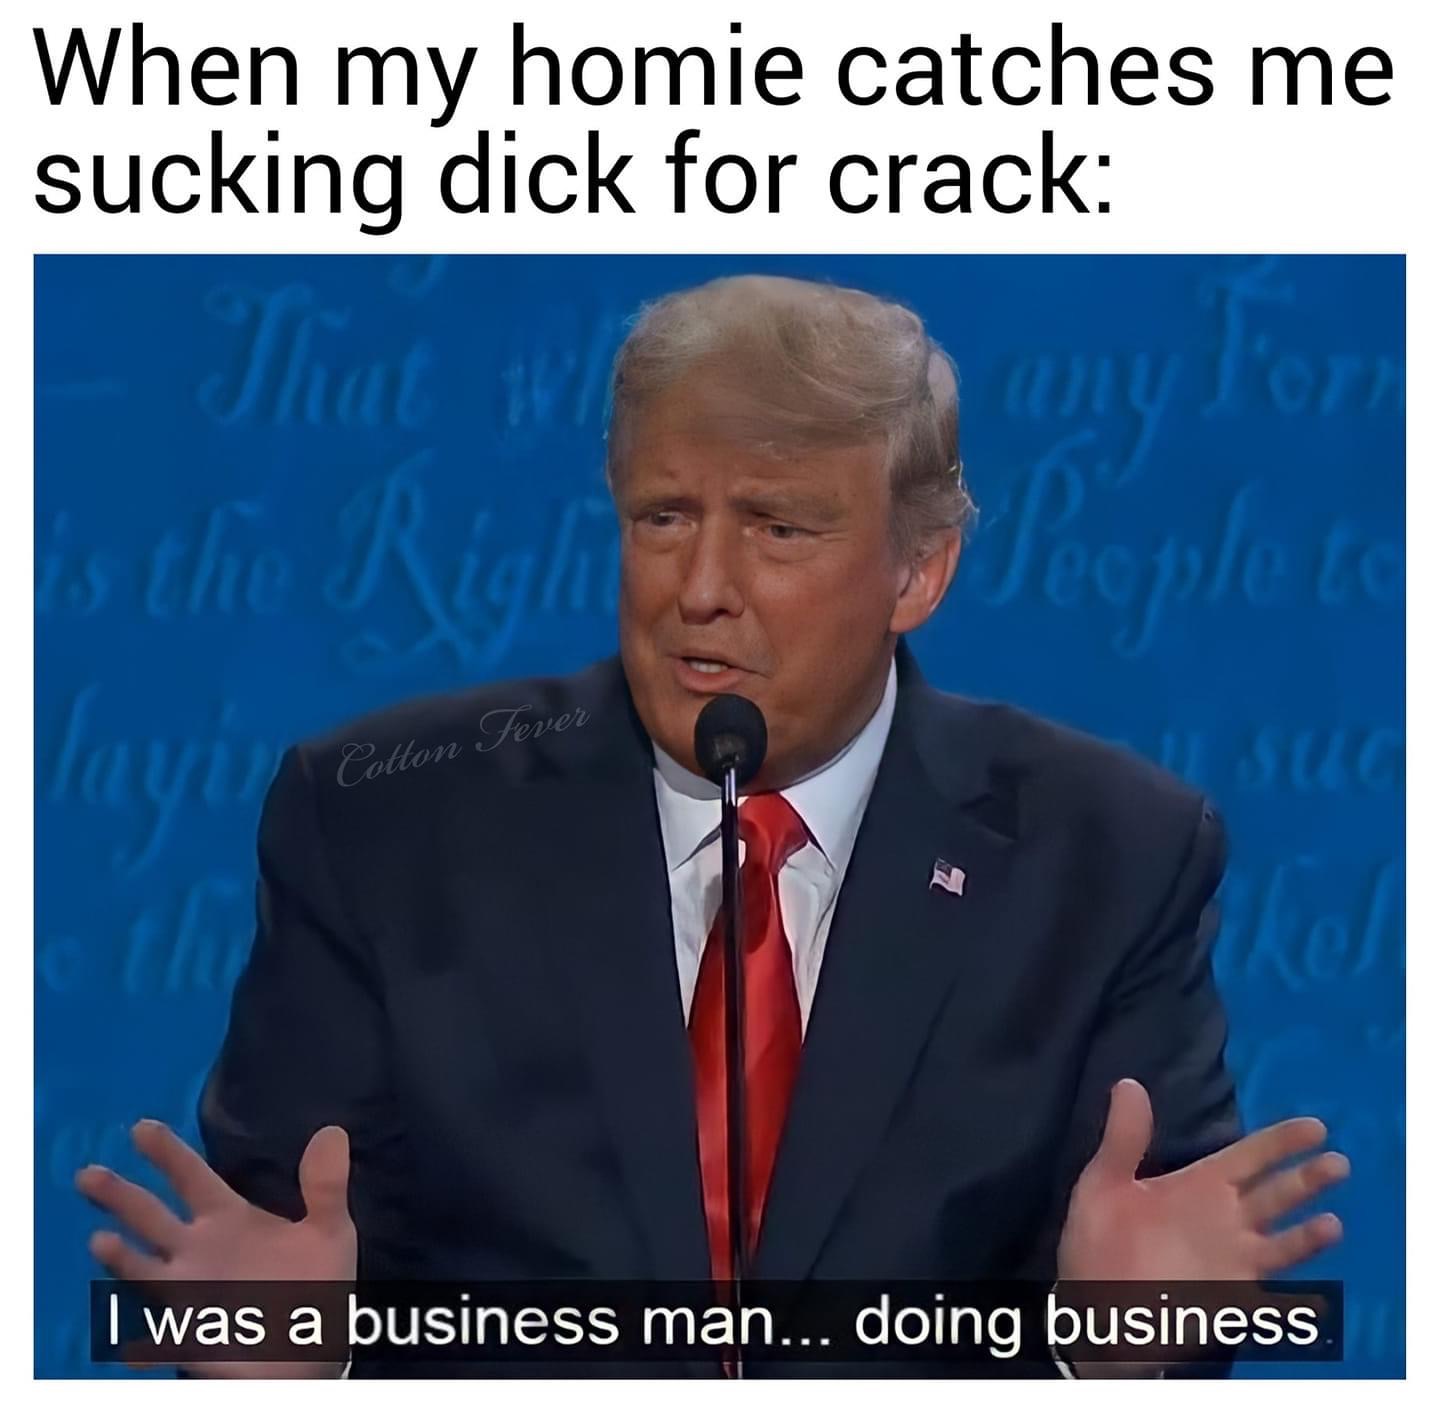 Karen - When my homie catches me sucking dick for crack That Thie layly came Cotton Fever kes I was a business man... doing business